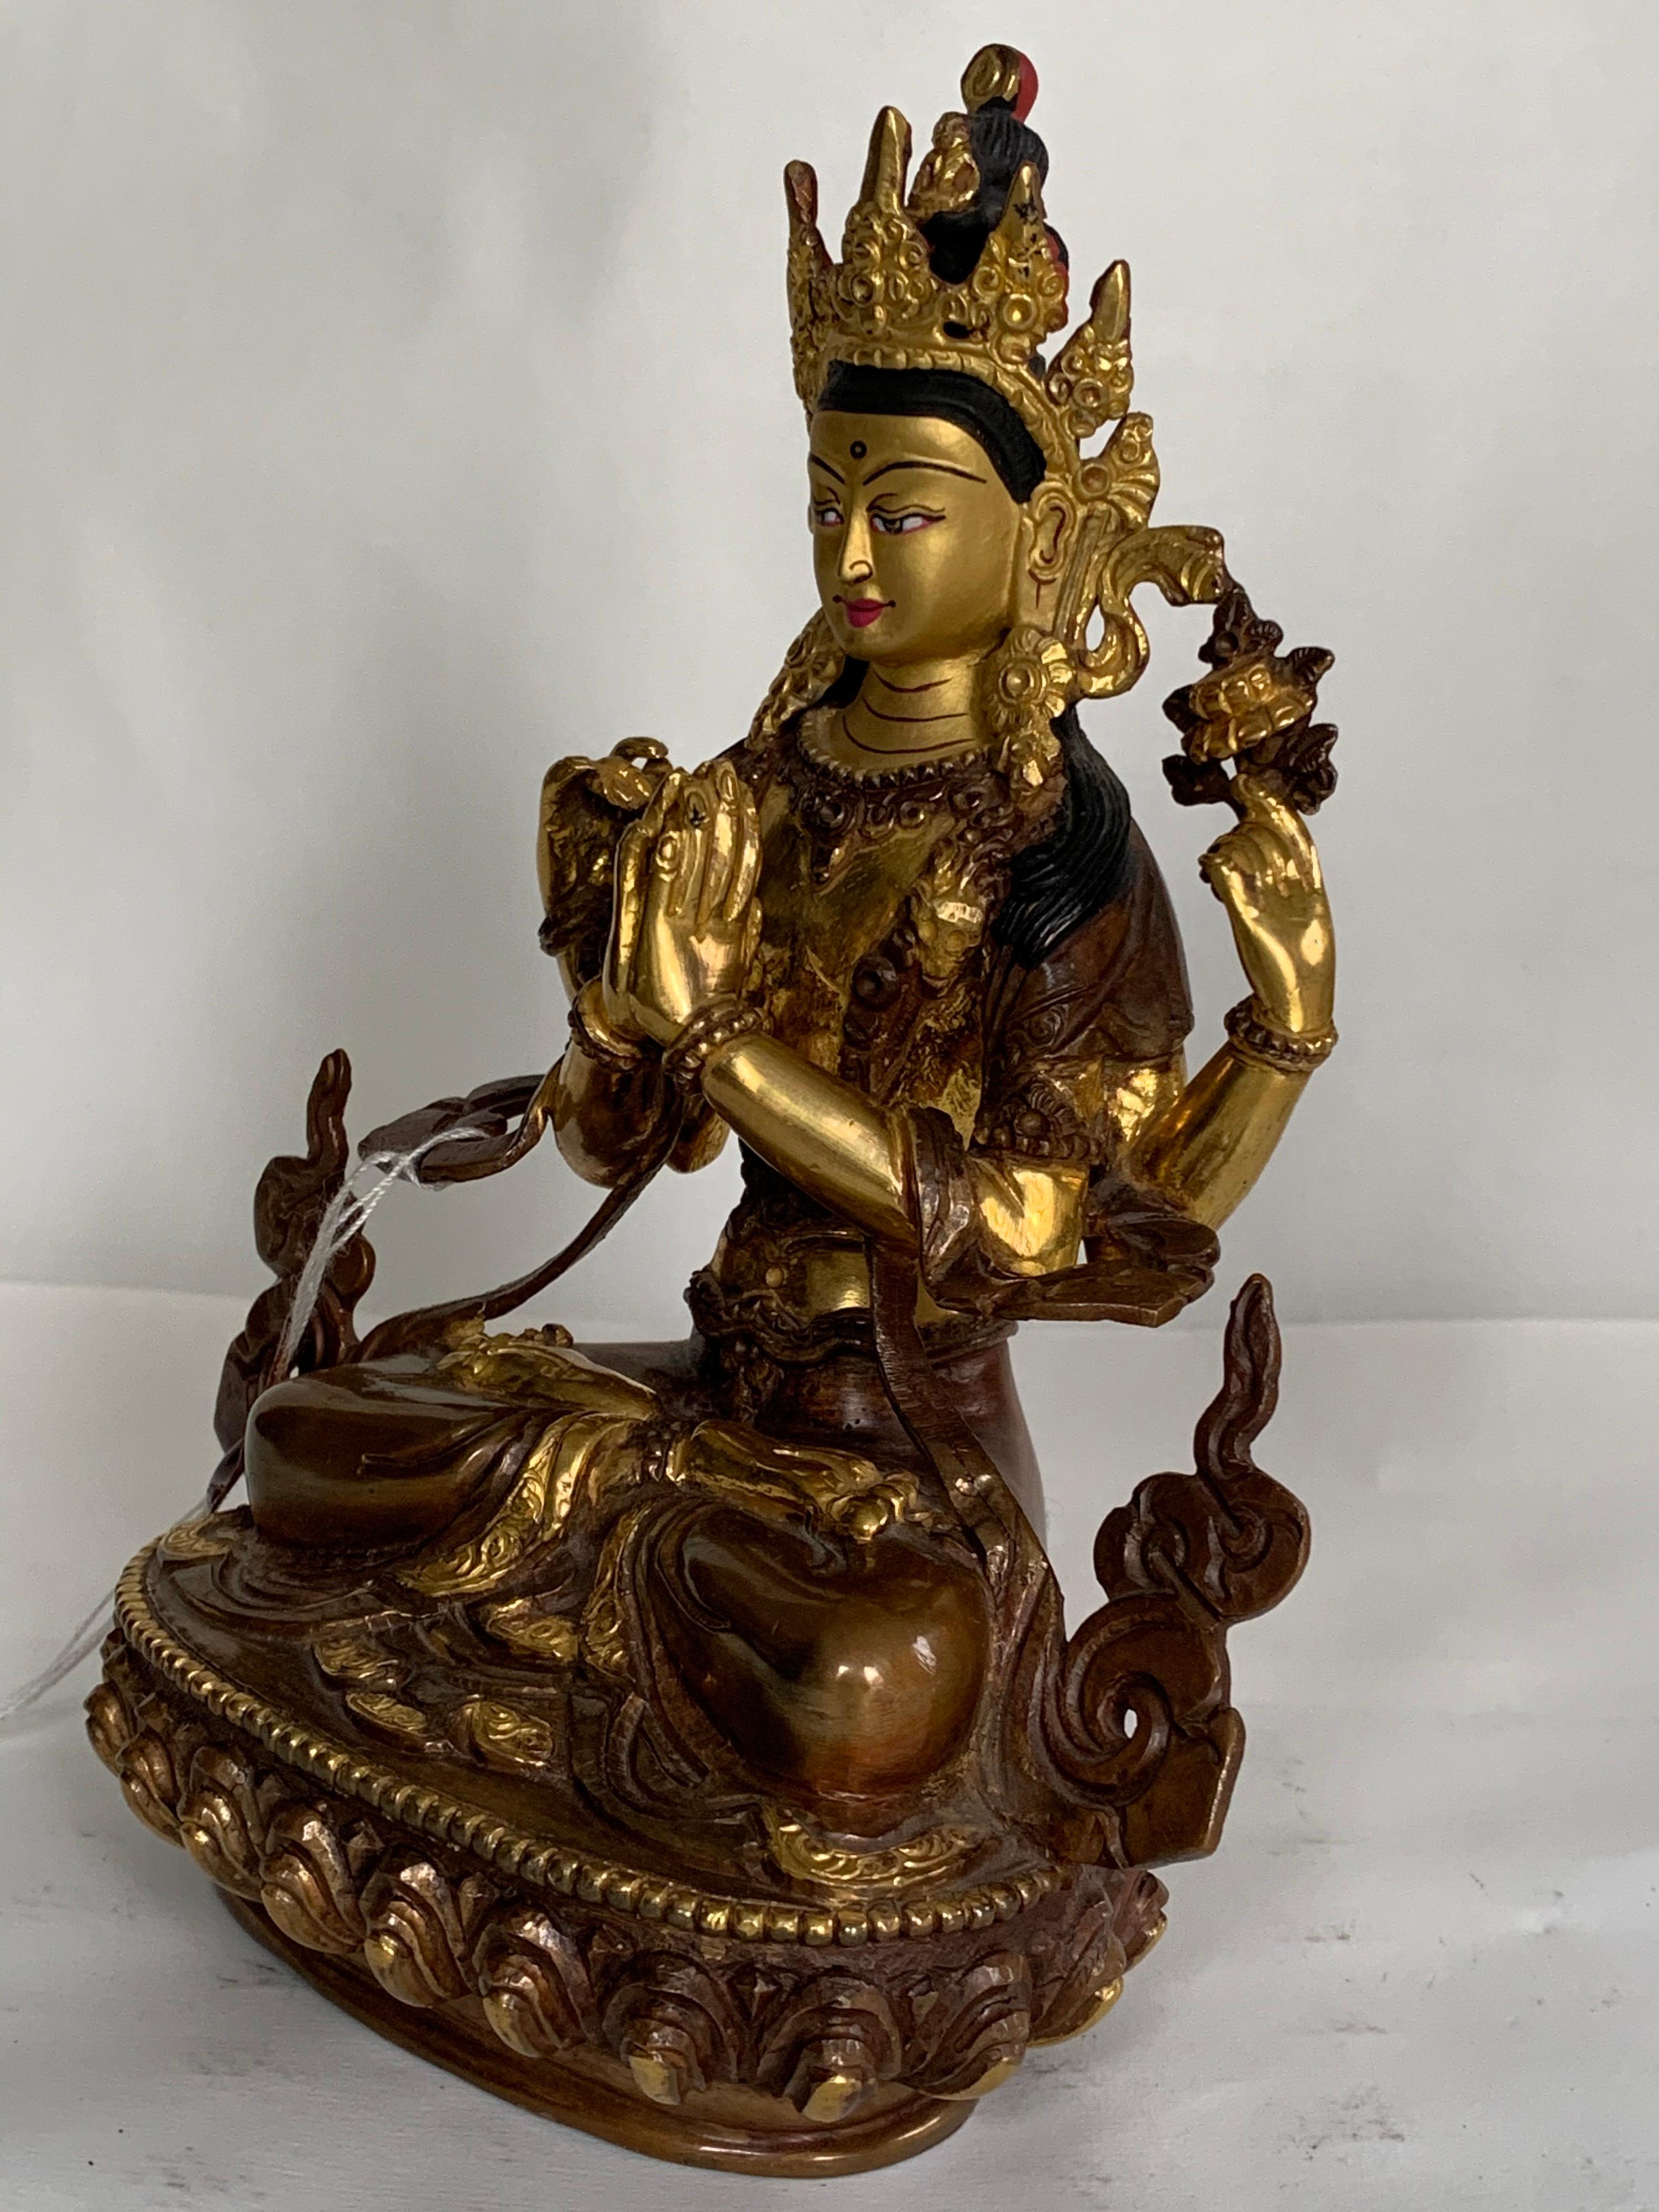 Chengrishi Statue 6 Inch with 24K Gold Handcrafted by Lost Wax Process - Sculpture by Unknown